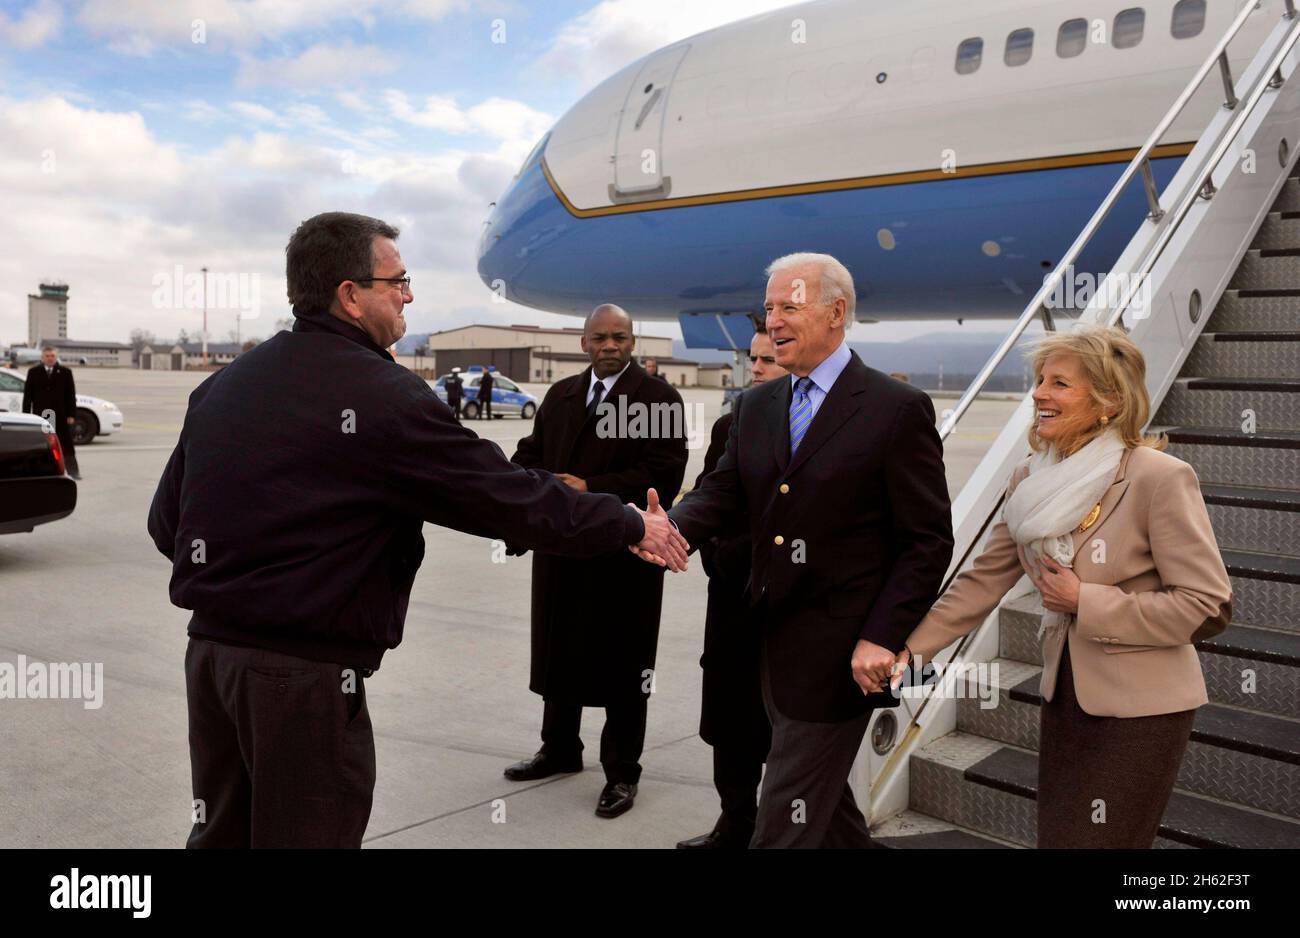 Deputy Secretary of Defense Ashton B. Carter greets Vice President Joe Biden and Second Lady Jill Biden as they arrive in Ramstein, Germany, on Feb. 3, 2013.  Carter and the Bidens will visit wounded warriors recovering at Landstuhl Regional Medical Center to thank them for their service.  Both Carter and Biden attended the 49th Munich Security Conference in Munich the previous day.  The conference is an annual meeting of heads of state, foreign affairs leaders and defense policy leaders from around the world.  Germany is the second stop of Carter’s six-day trip to meet with officials in Franc Stock Photo